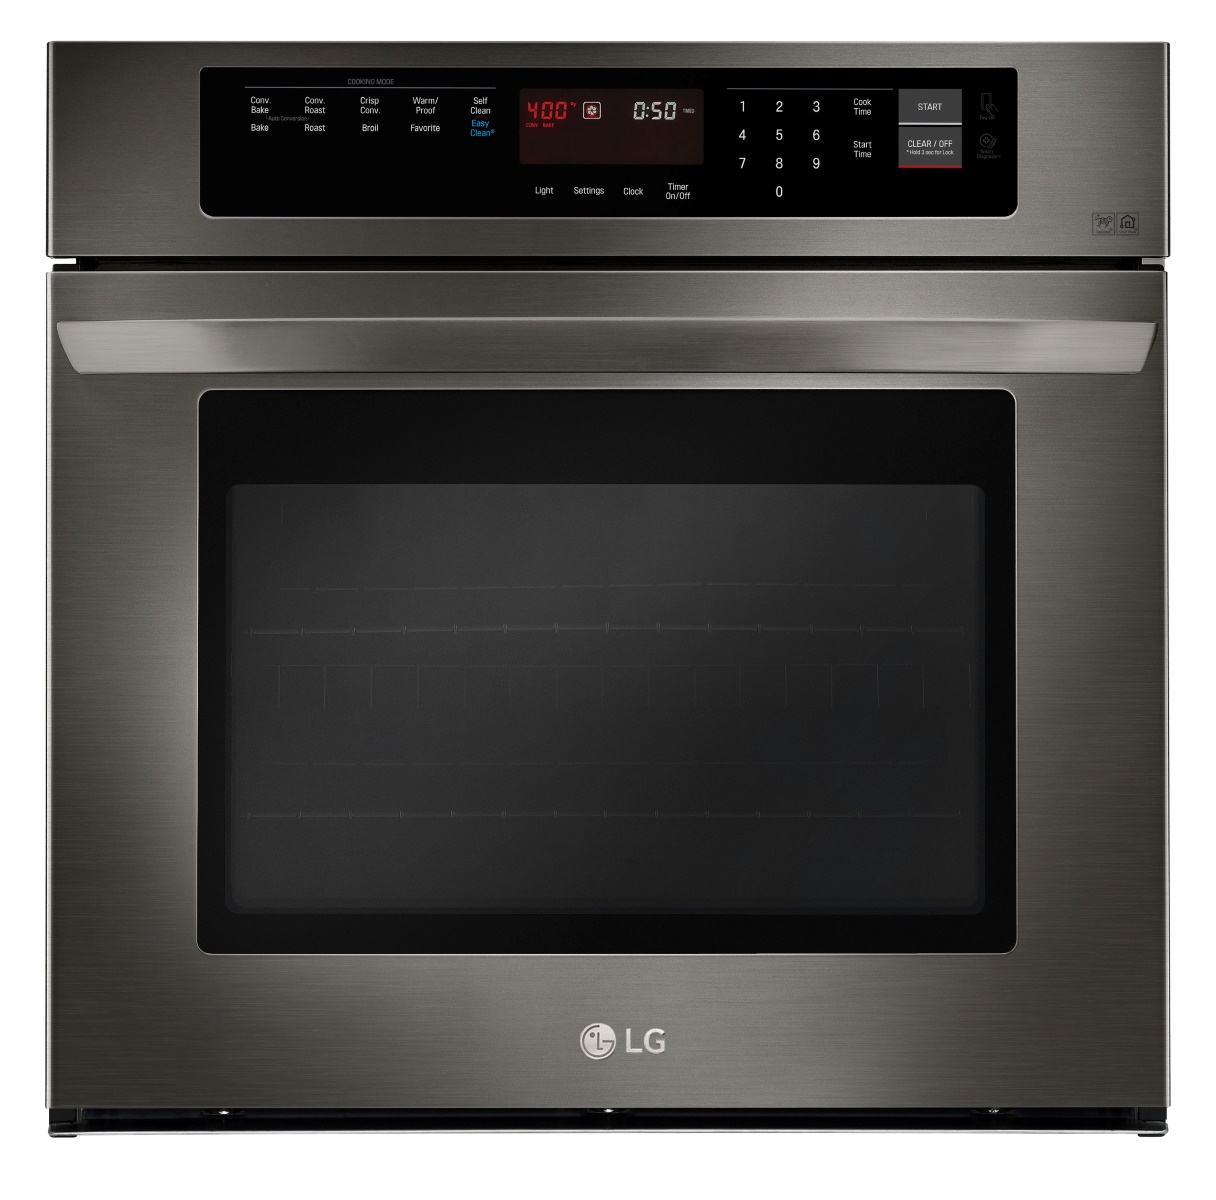 How To Fix The Error Code F-36 For LG Oven